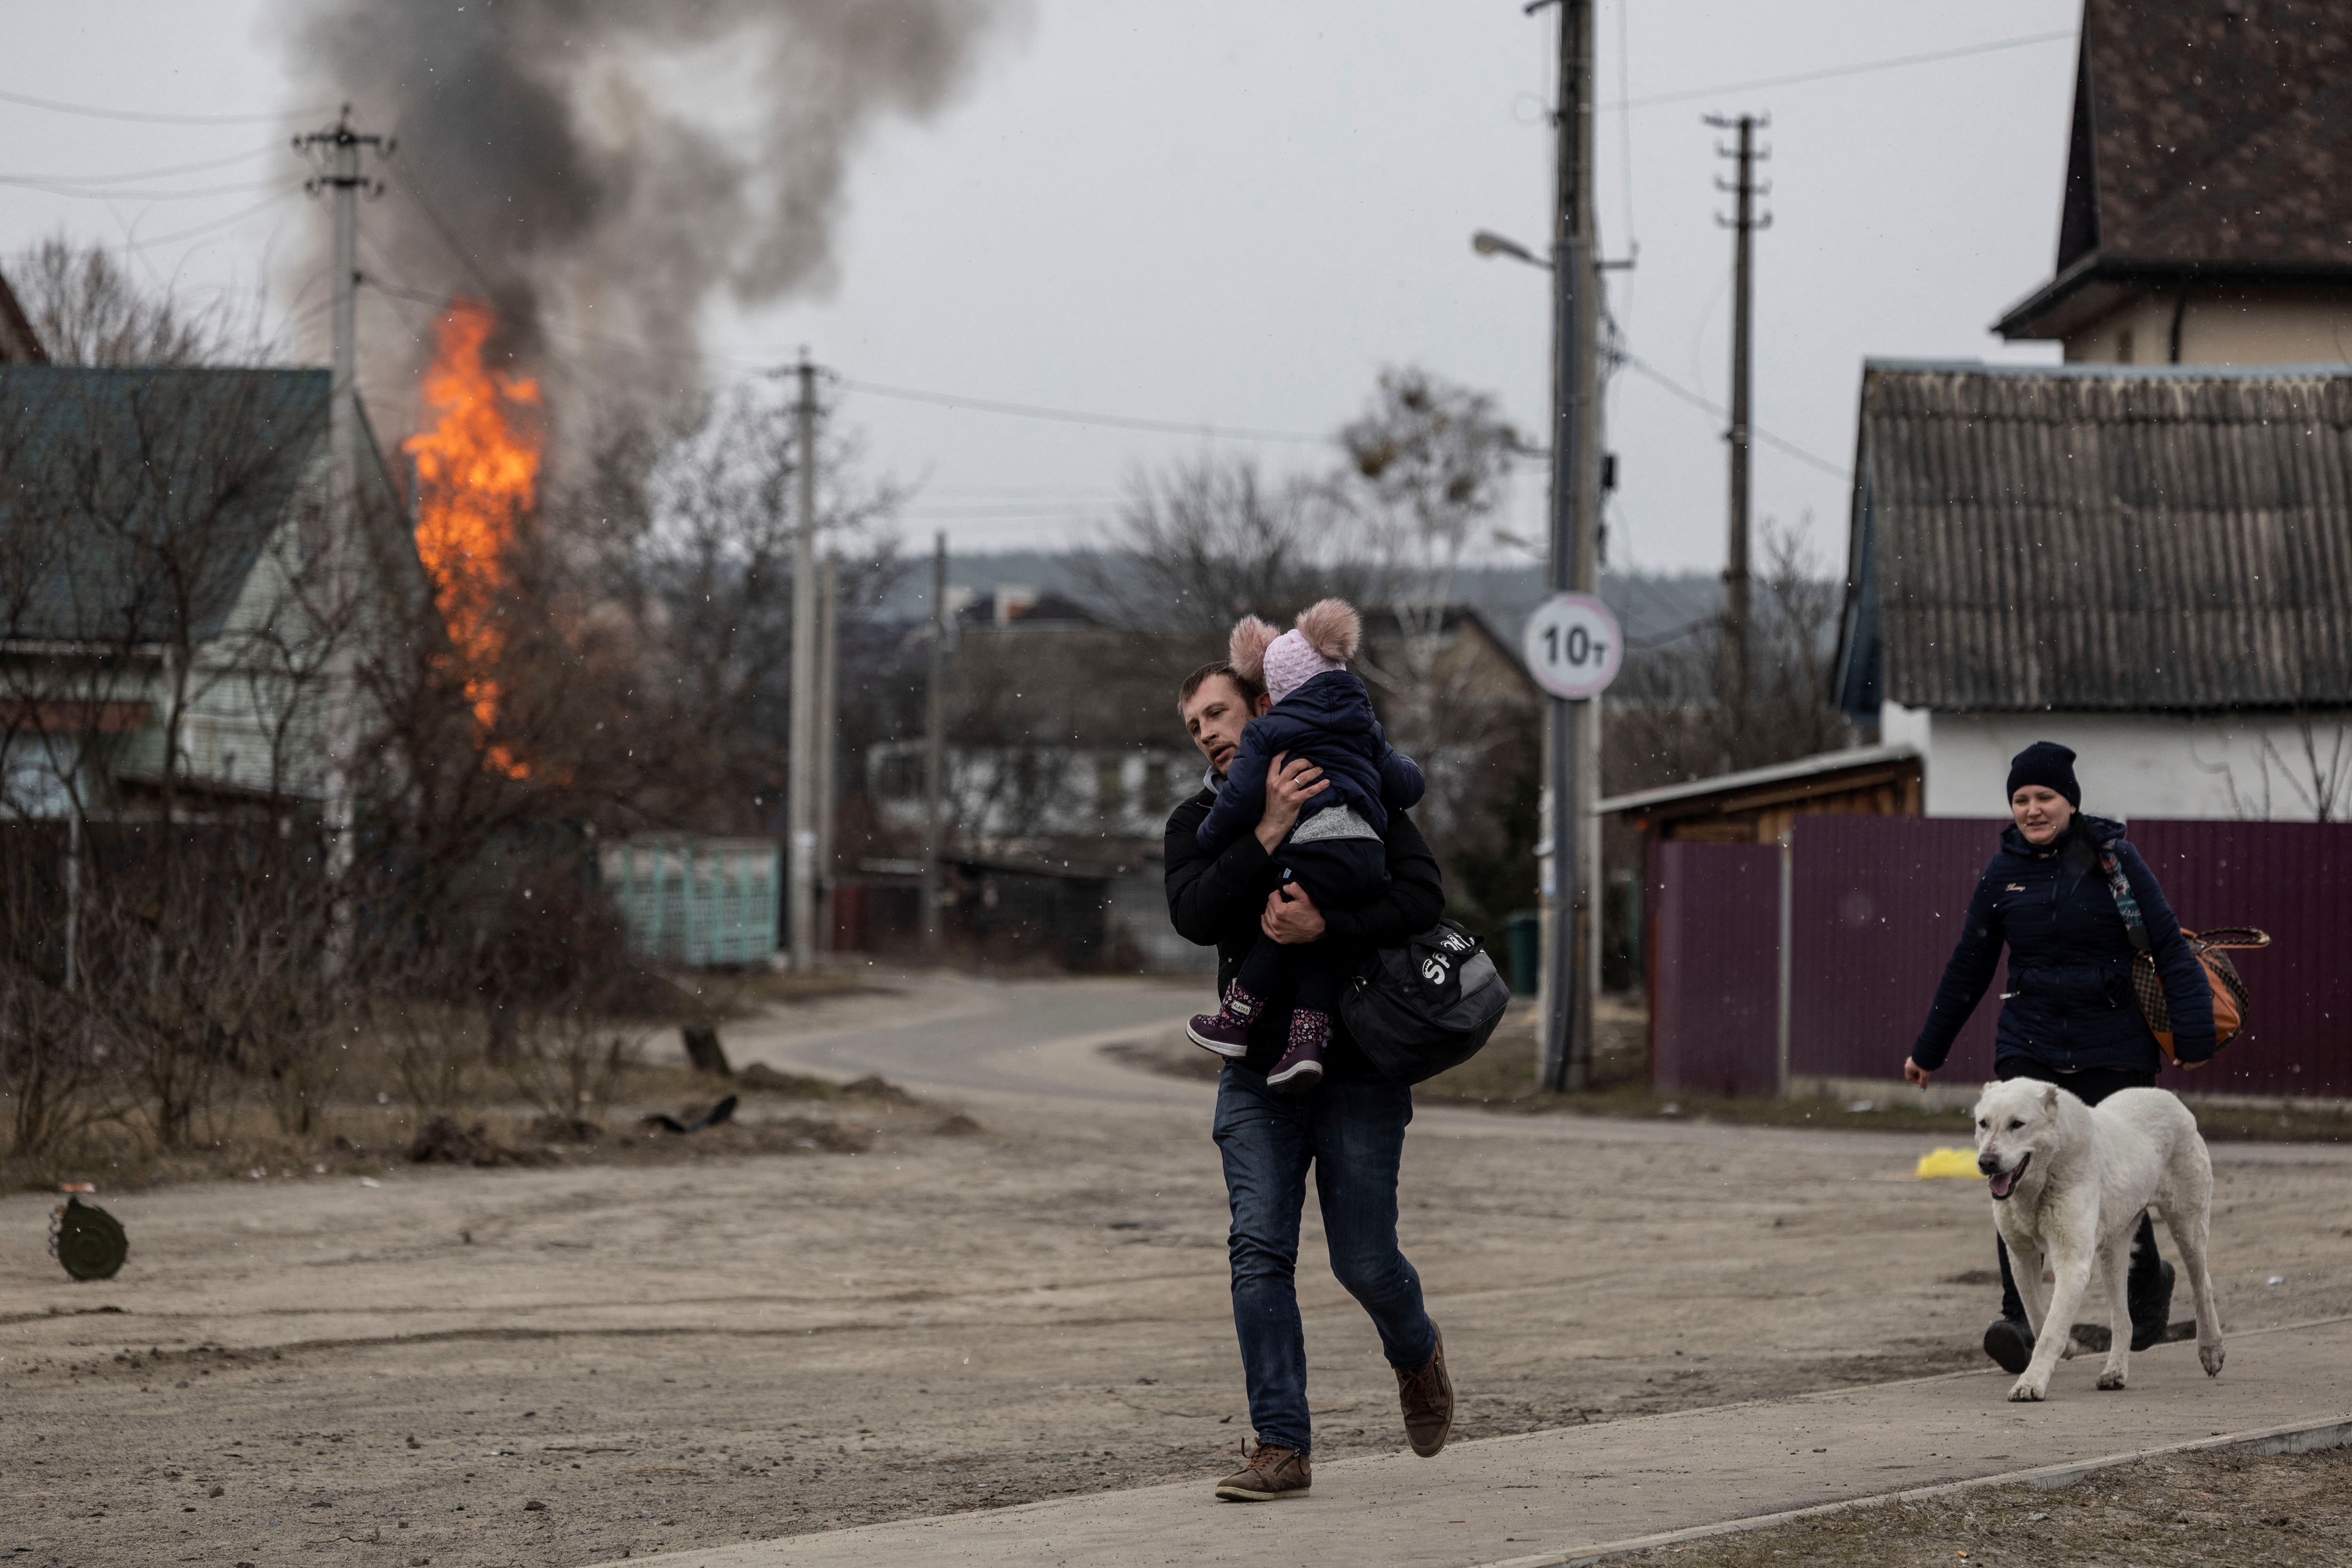 Local residents escape from the town of Irpin, after heavy shelling landed on the only escape route used by locals, as Russian troops advance towards the capital of Kyiv, in Irpin